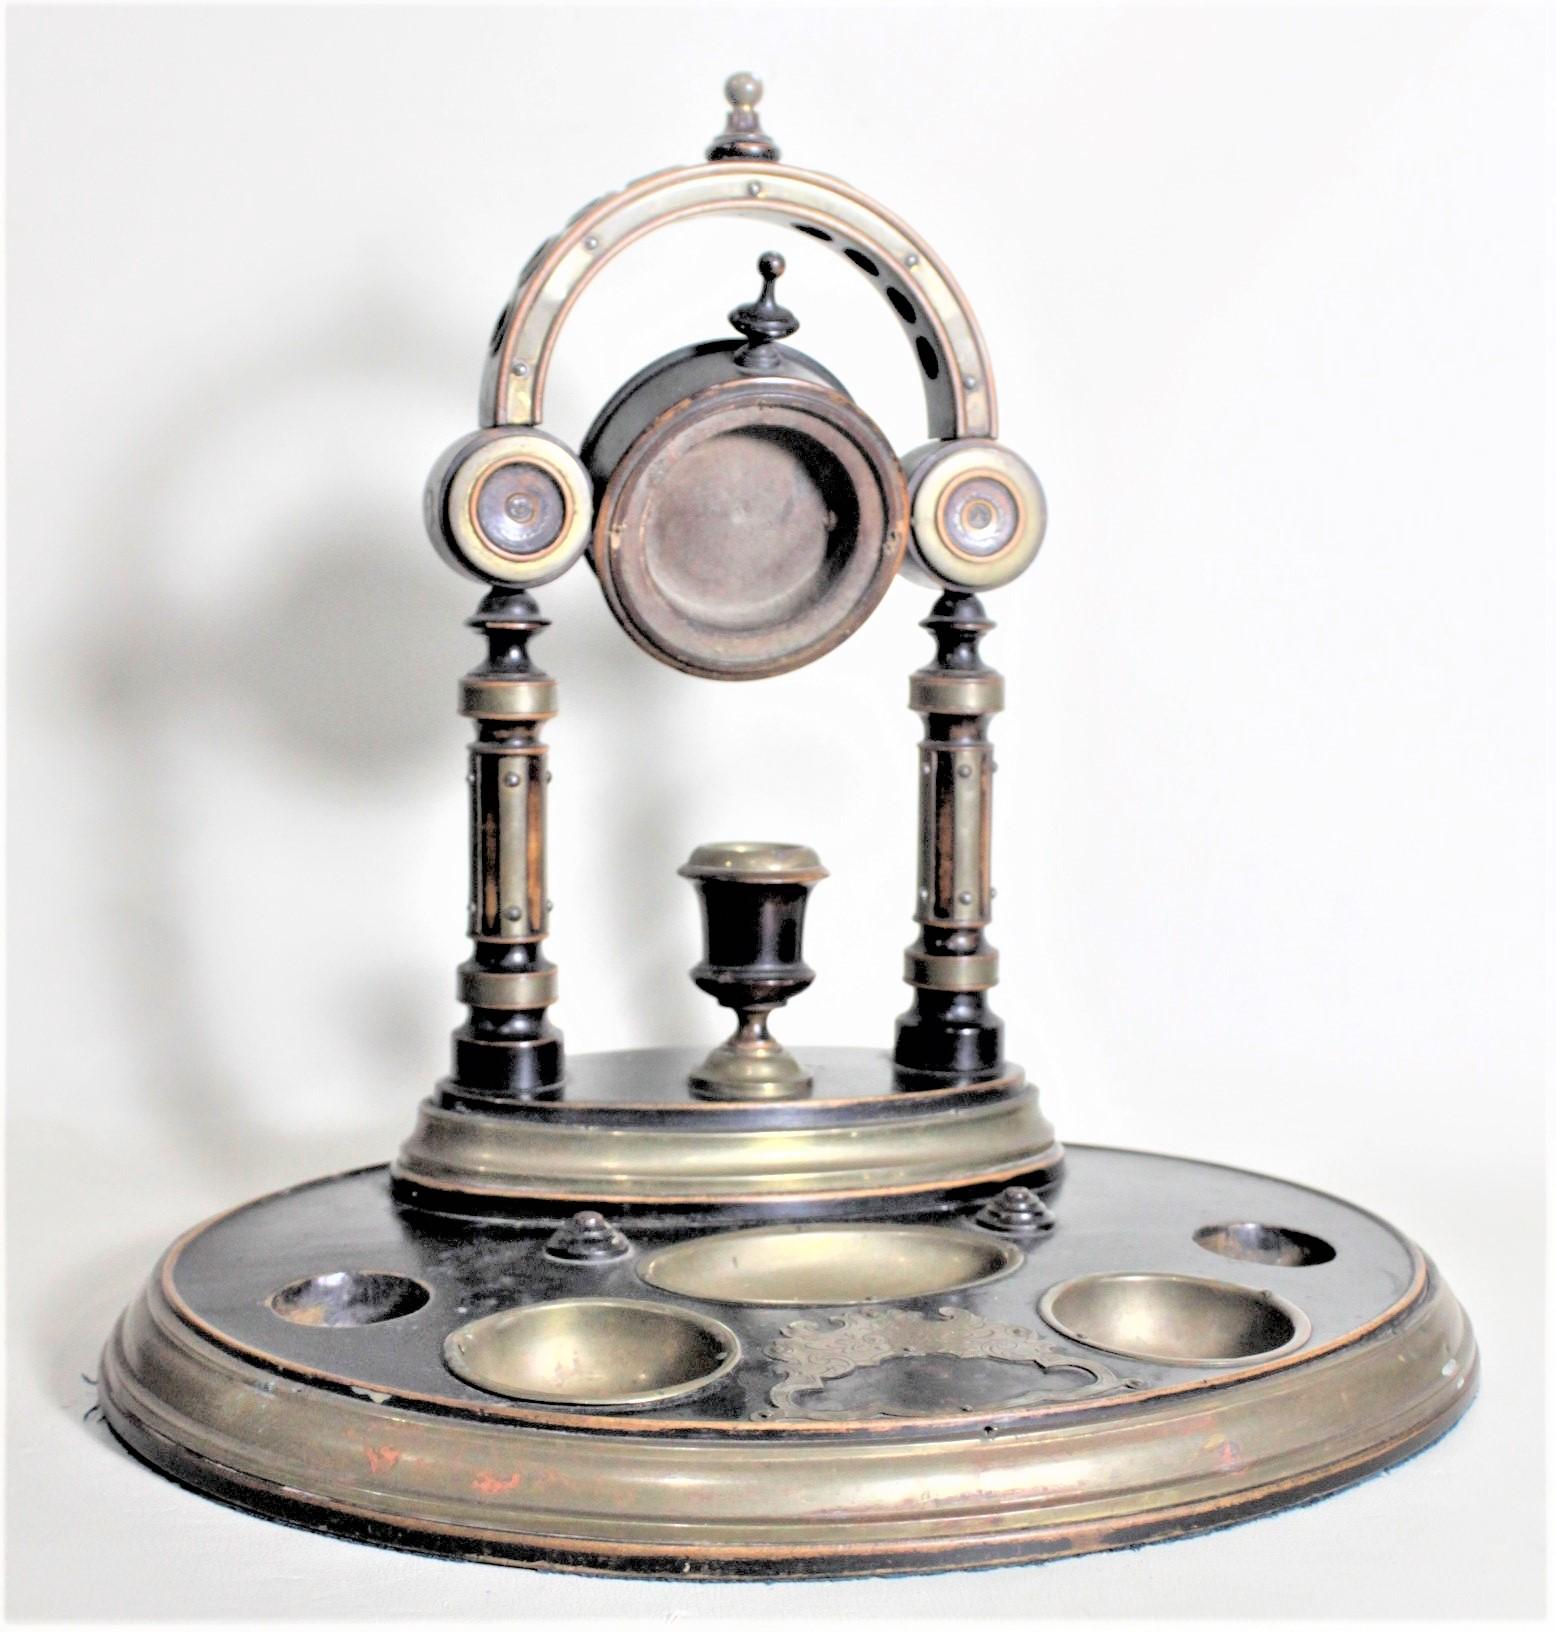 This large wooden dresser top pocket watch stand and vide poche is unmarked, but believed to have been made in England in approximately 1890 in the period Victorian style. The stand is composed of mahogany with a nicely turned stand at the back and